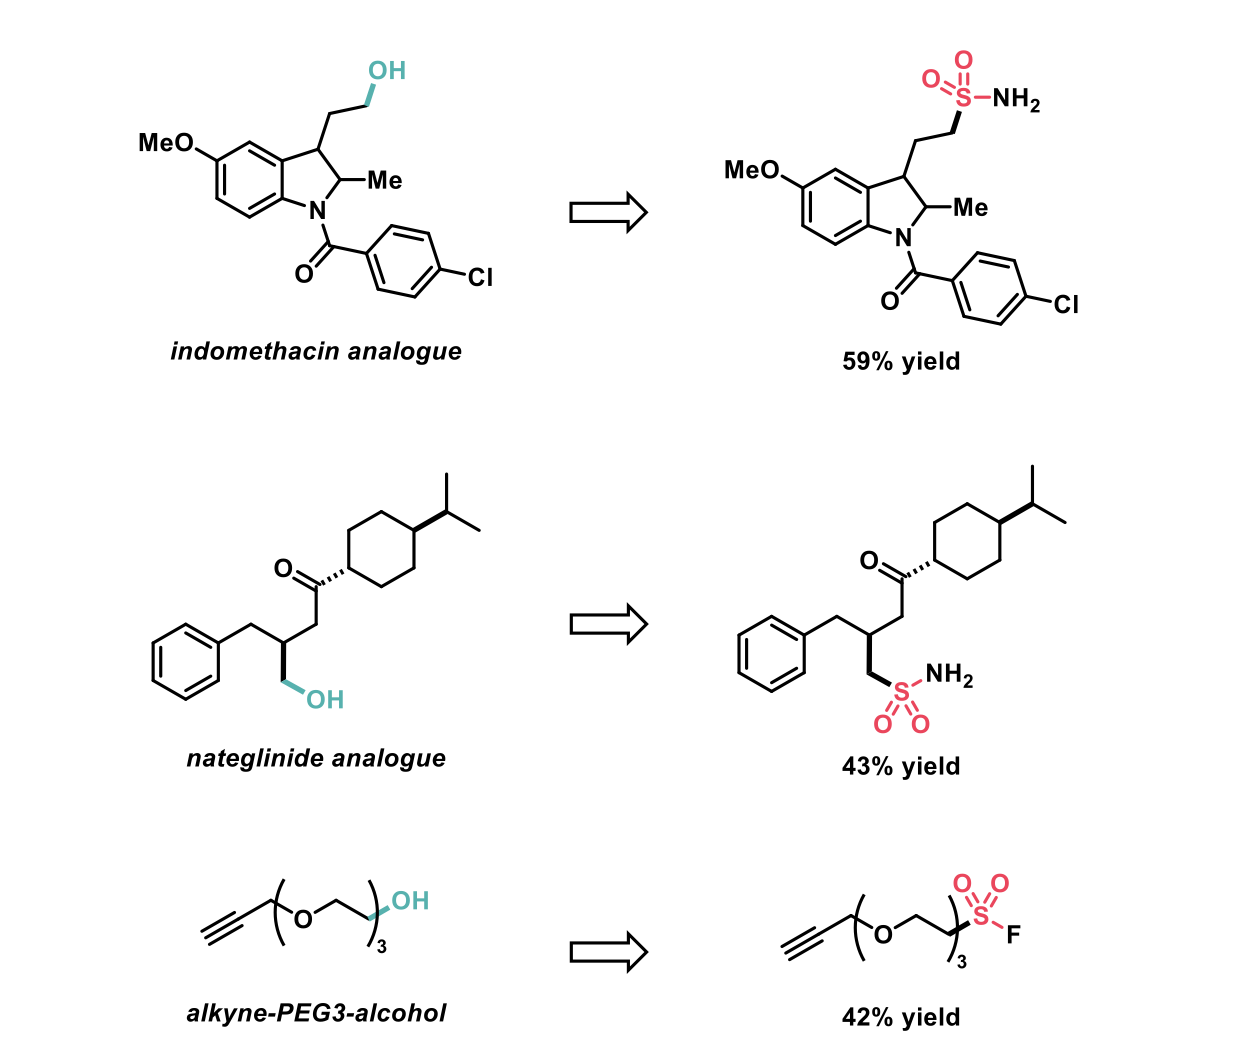 late-stage functionalisation of drugs and biologically relevant molecules in moderate yields